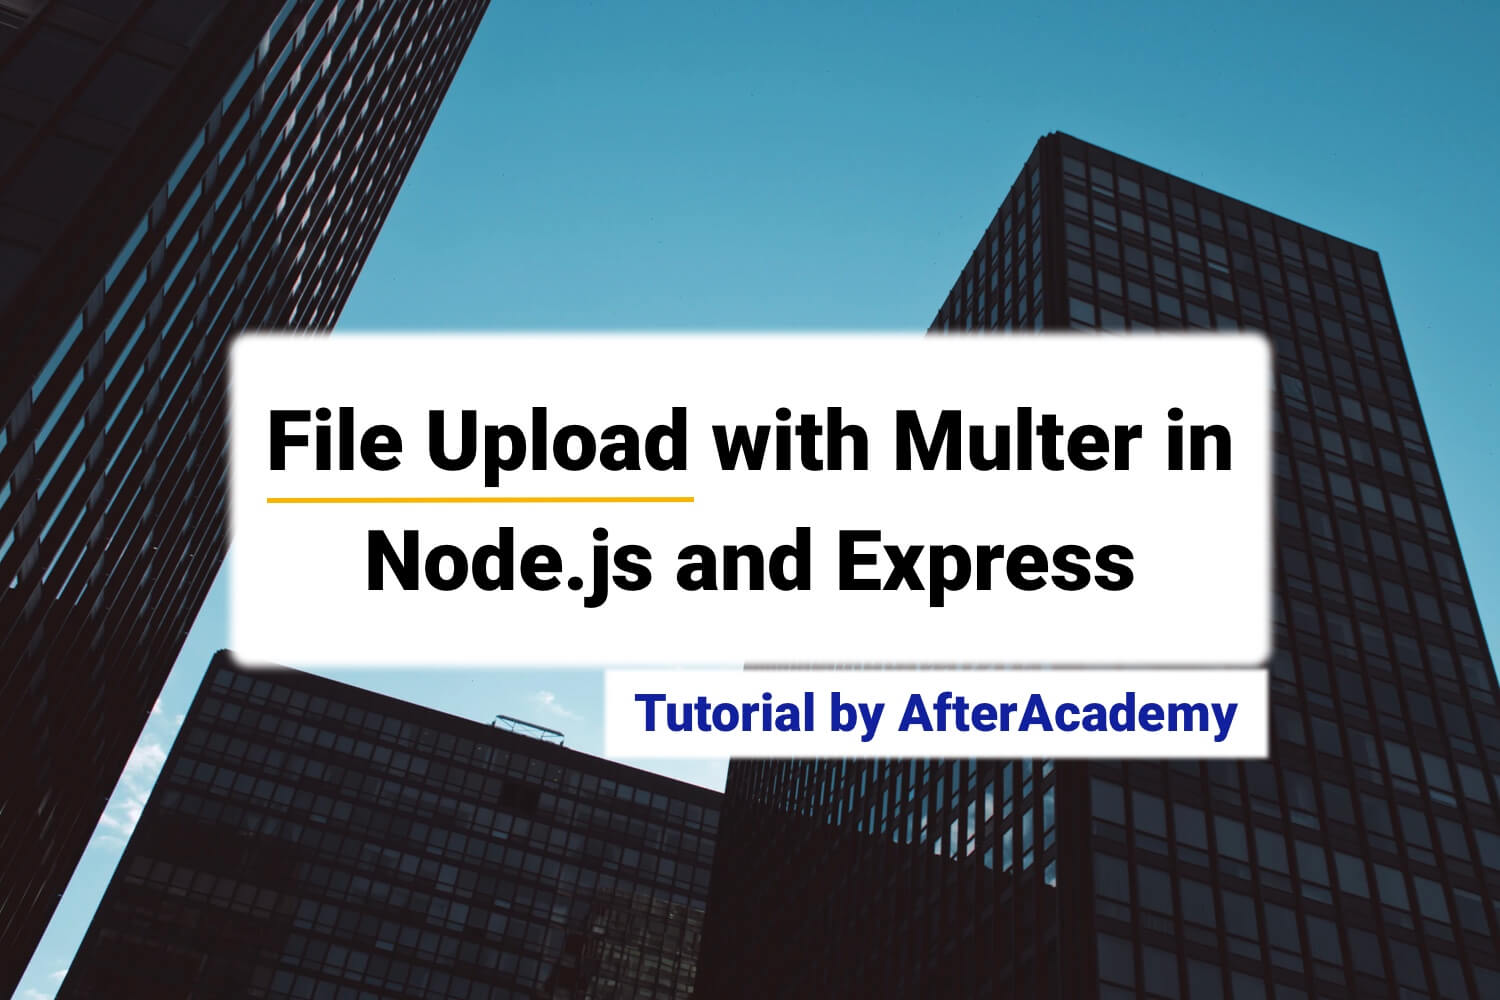 File Upload with Multer in Node.js and Express